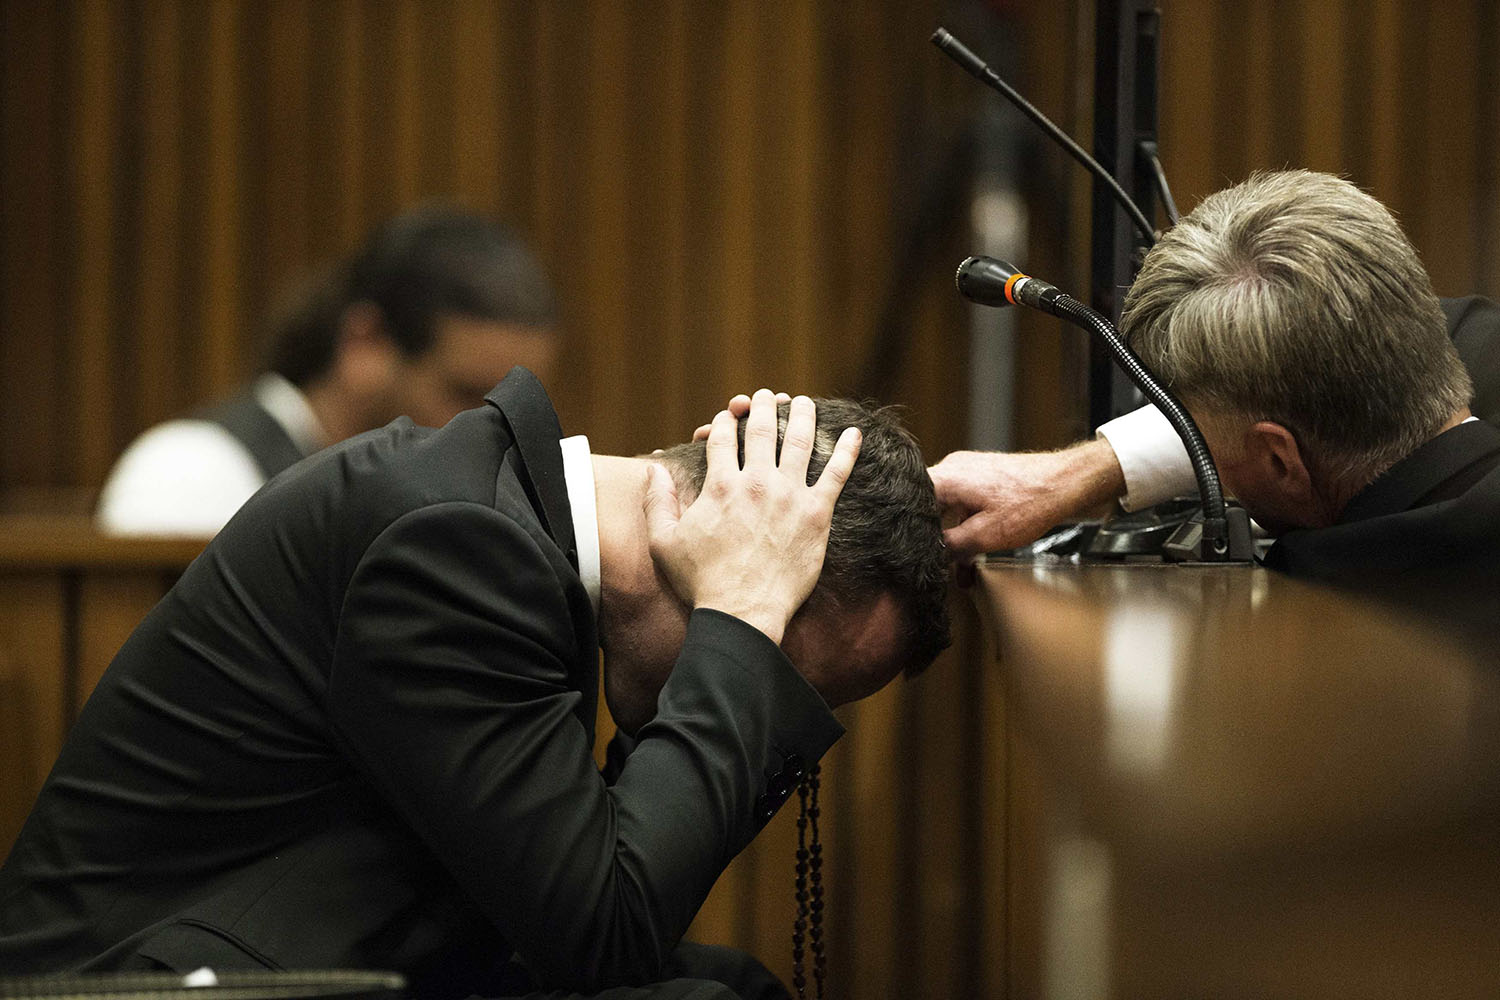 Mar. 6, 2014. A member of the defence legal team reaches out to Olympic and Paralympic track star Oscar Pistorius as he holds his head while a witness testifies during the fourth day of his trial for the murder of his girlfriend Reeva Steenkamp at the North Gauteng High Court in Pretoria.